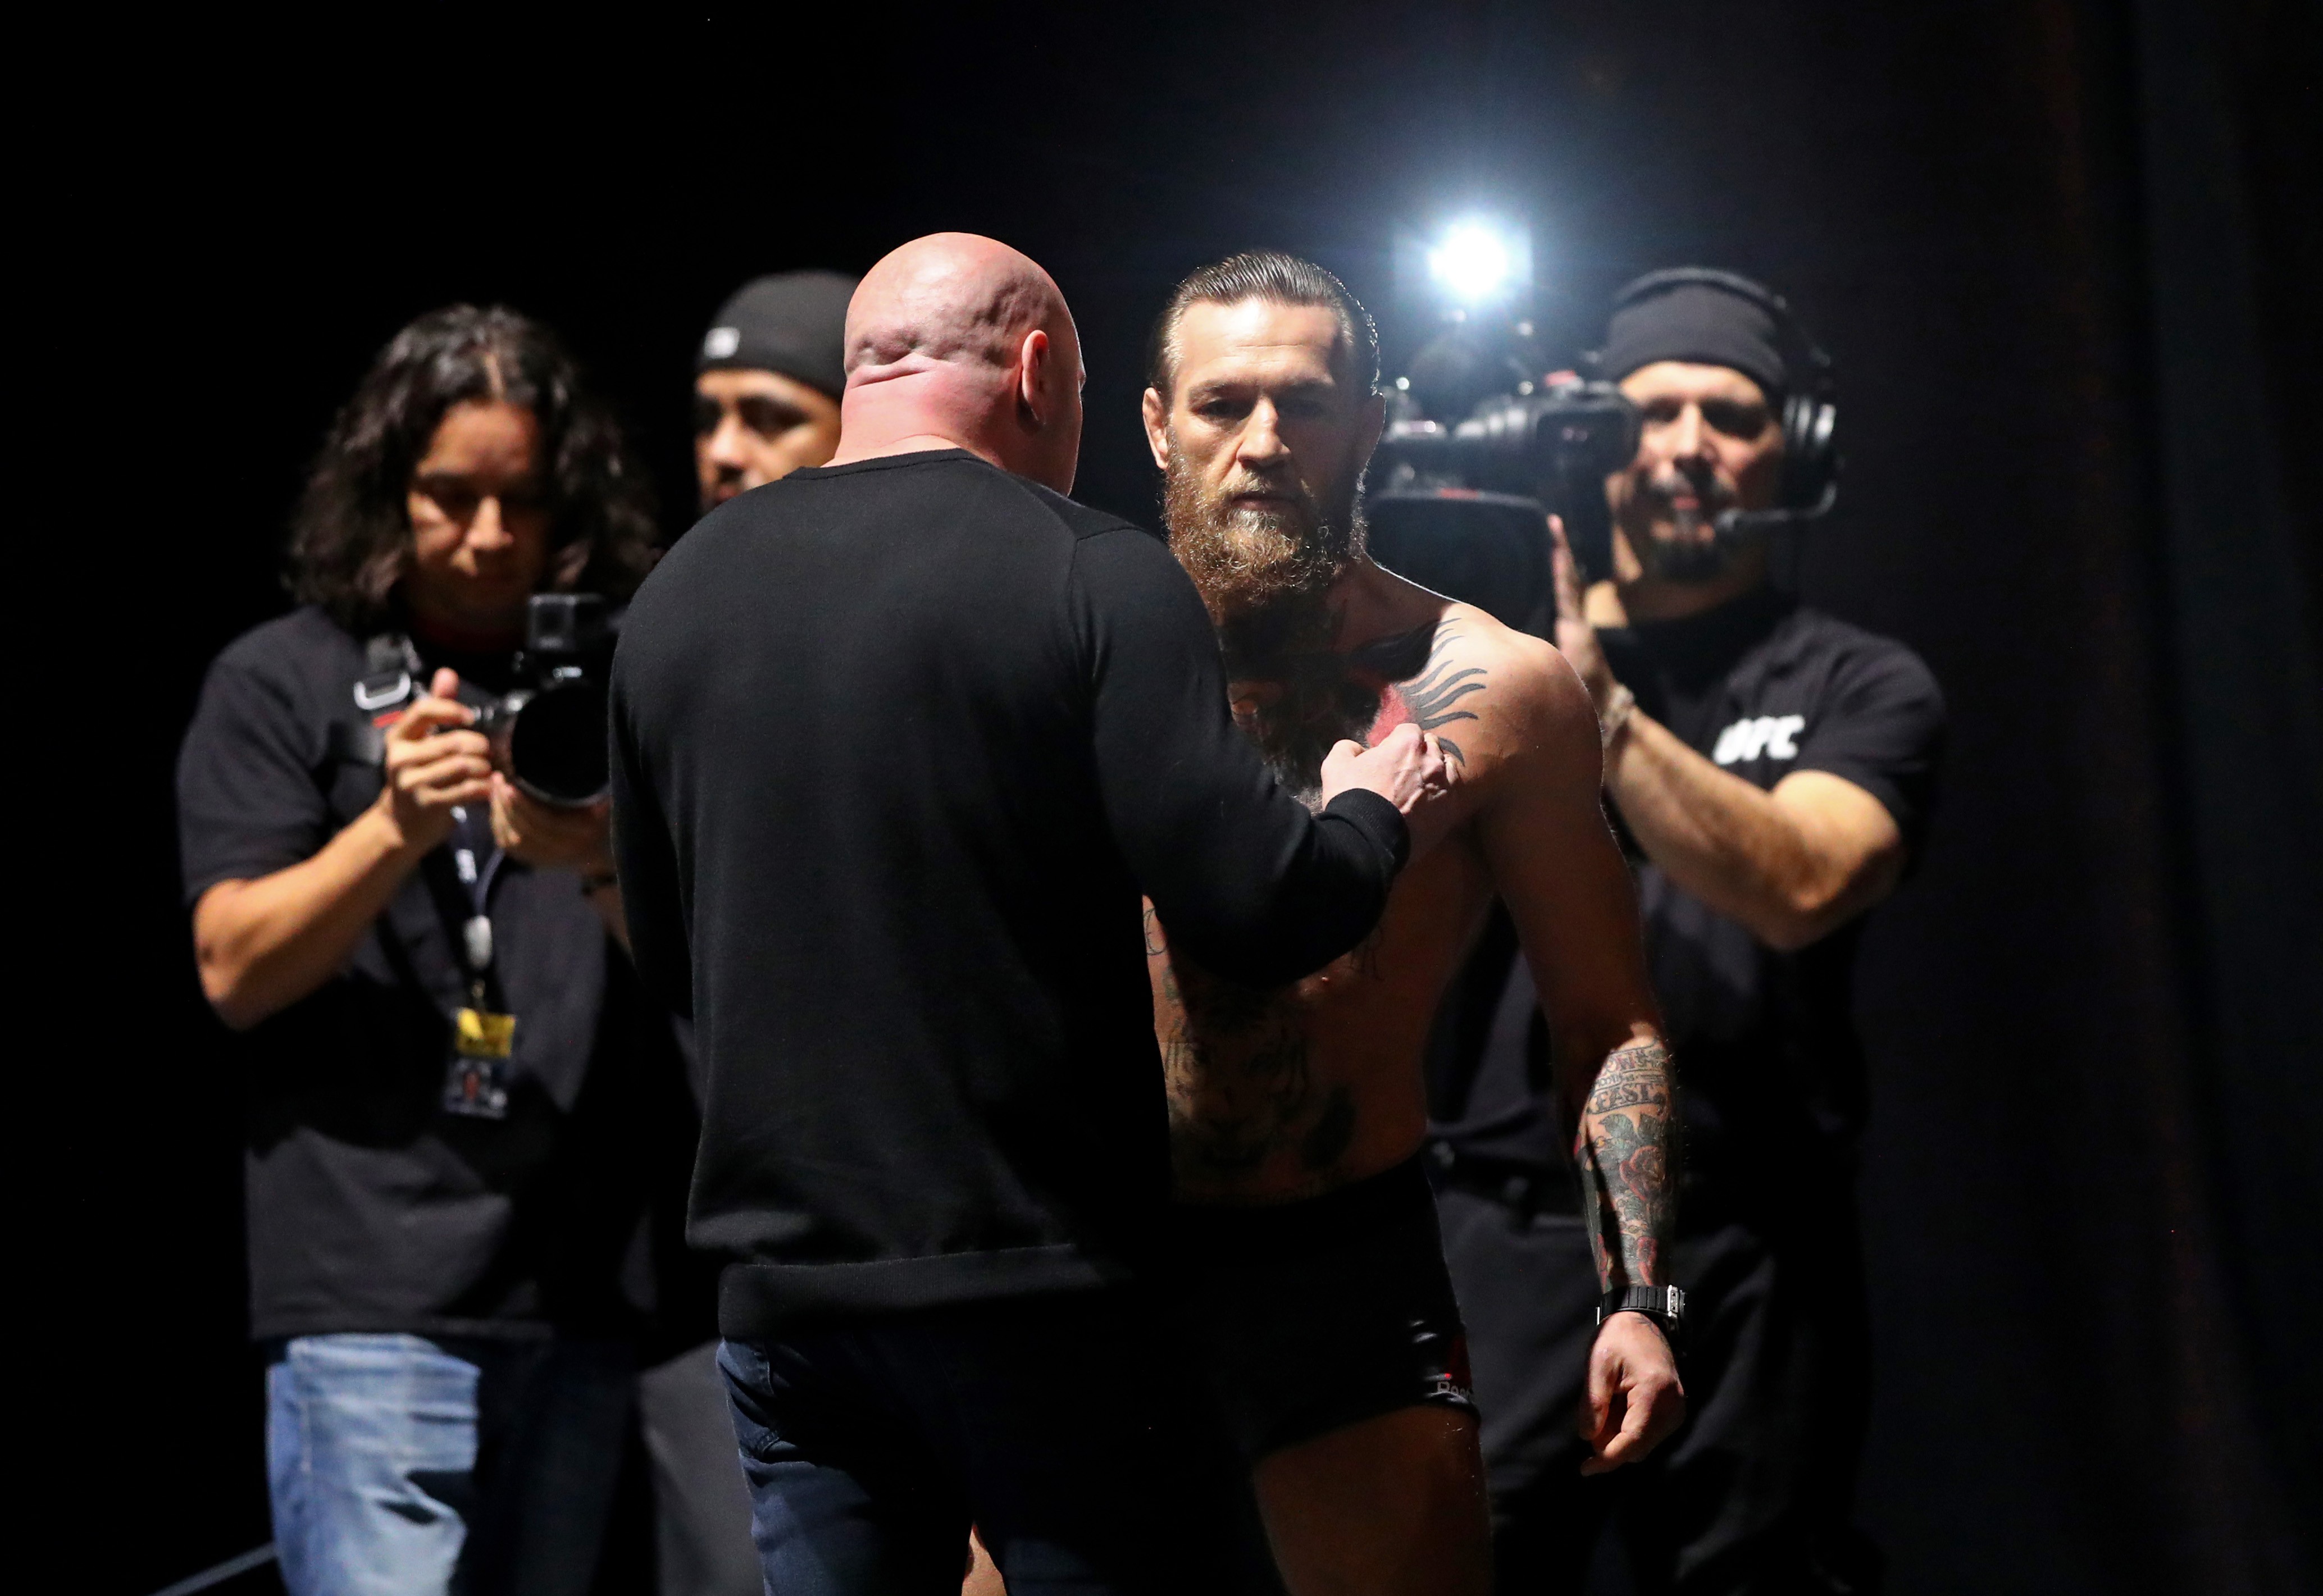 UFC president Dana White (left) talks with Conor McGregor during the weigh-ins for UFC 246. Photo: USA TODAY Sports